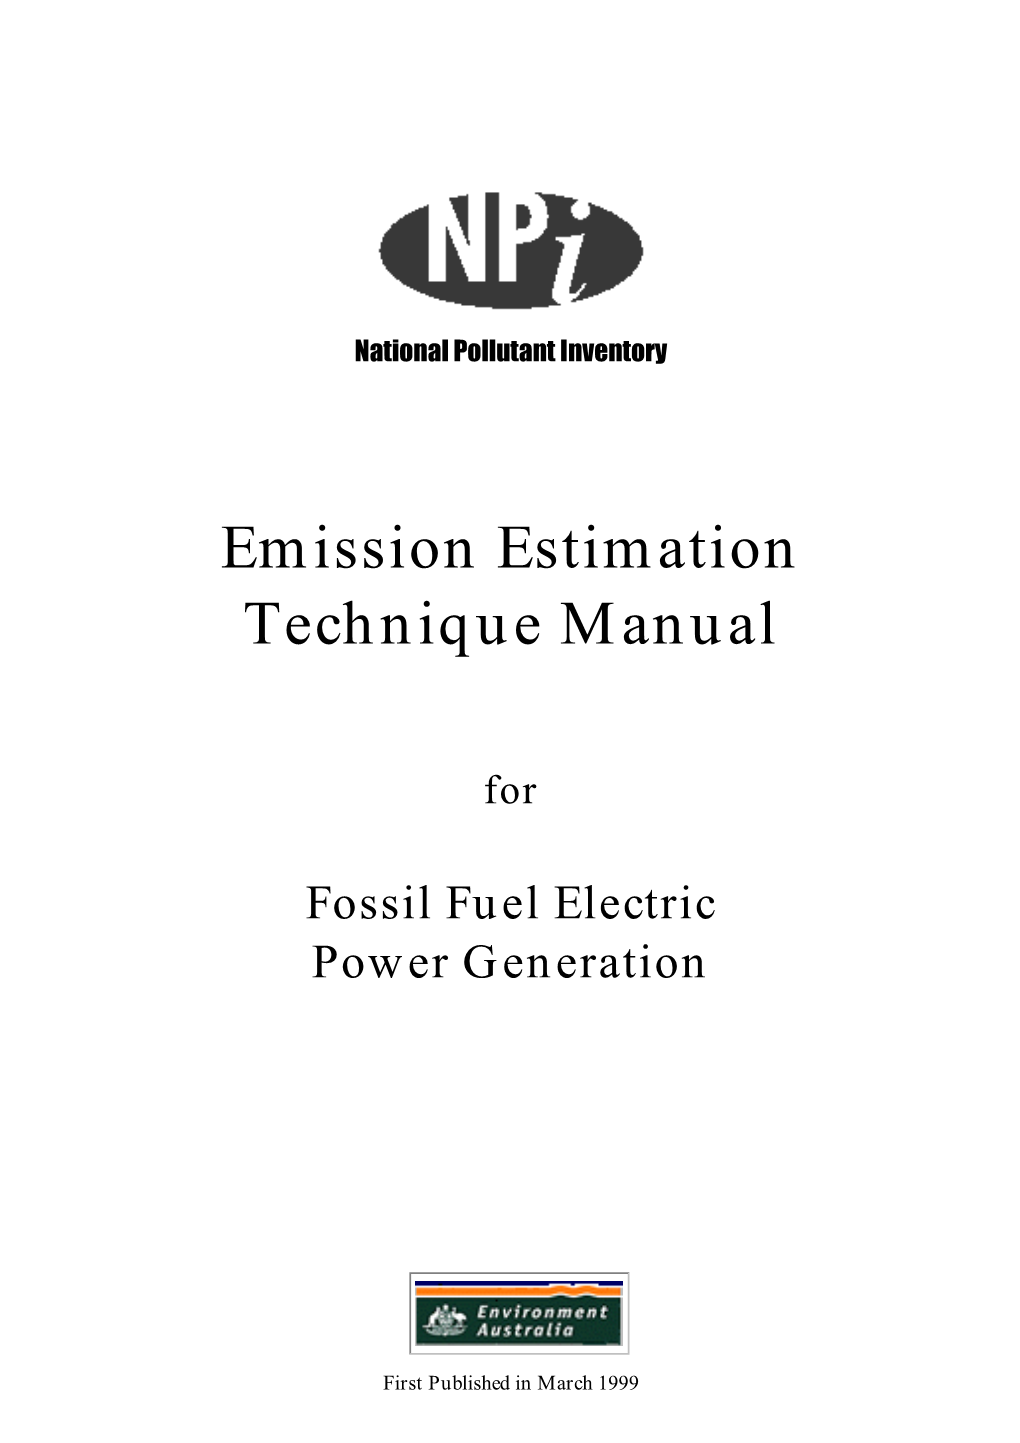 (NPI) Emission Estimation Techniques Manual for Fossil Fuel Electric